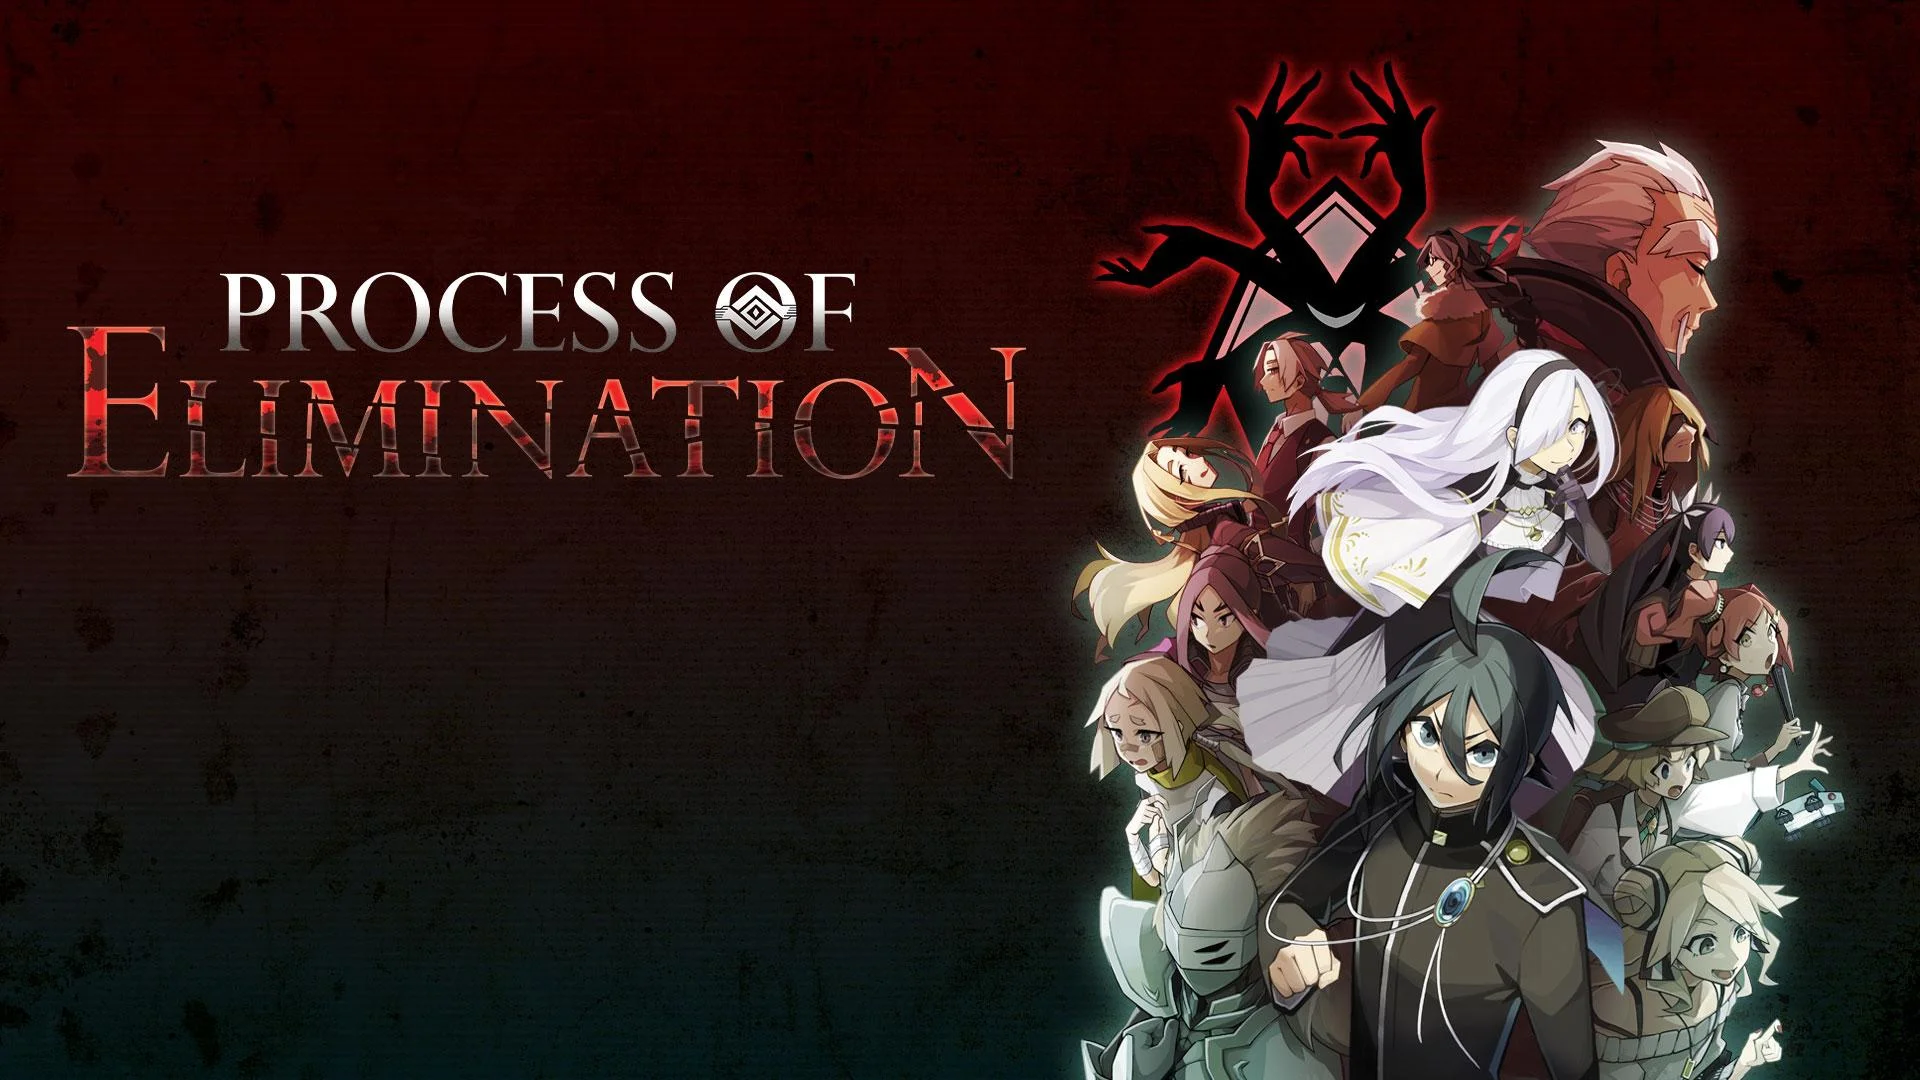 Process of Elimination demo